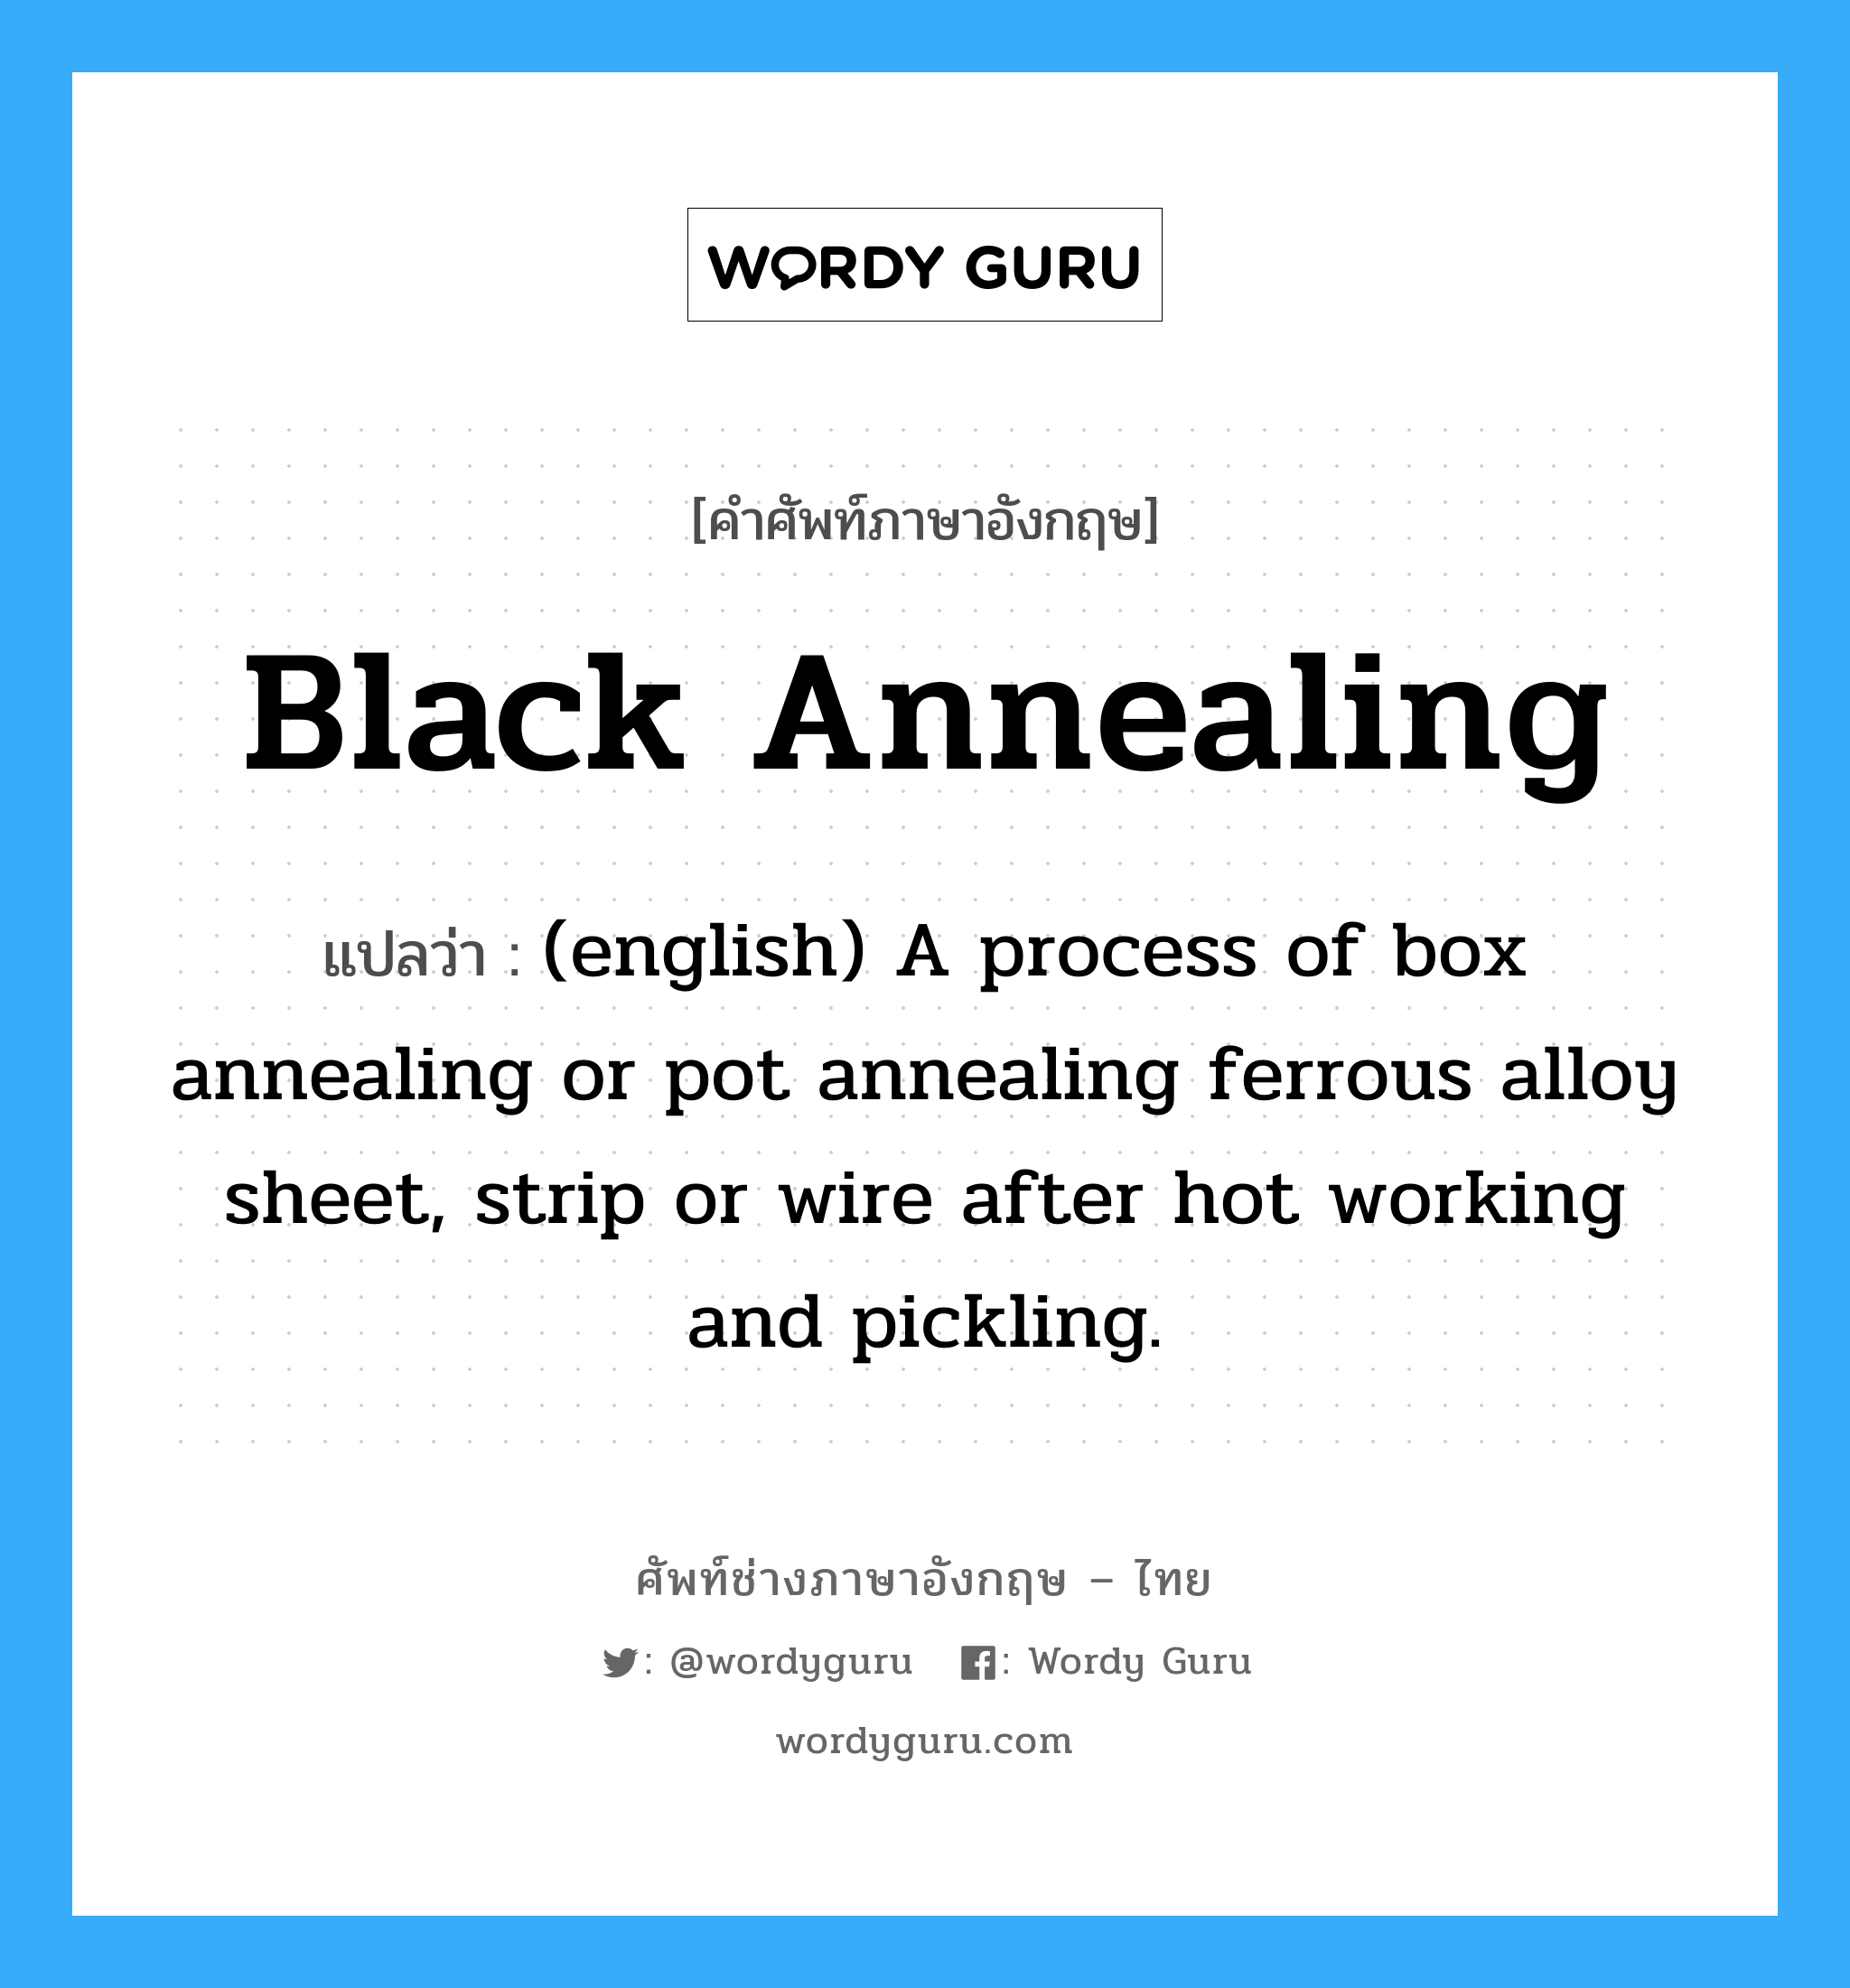 Black Annealing แปลว่า?, คำศัพท์ช่างภาษาอังกฤษ - ไทย Black Annealing คำศัพท์ภาษาอังกฤษ Black Annealing แปลว่า (english) A process of box annealing or pot annealing ferrous alloy sheet, strip or wire after hot working and pickling.